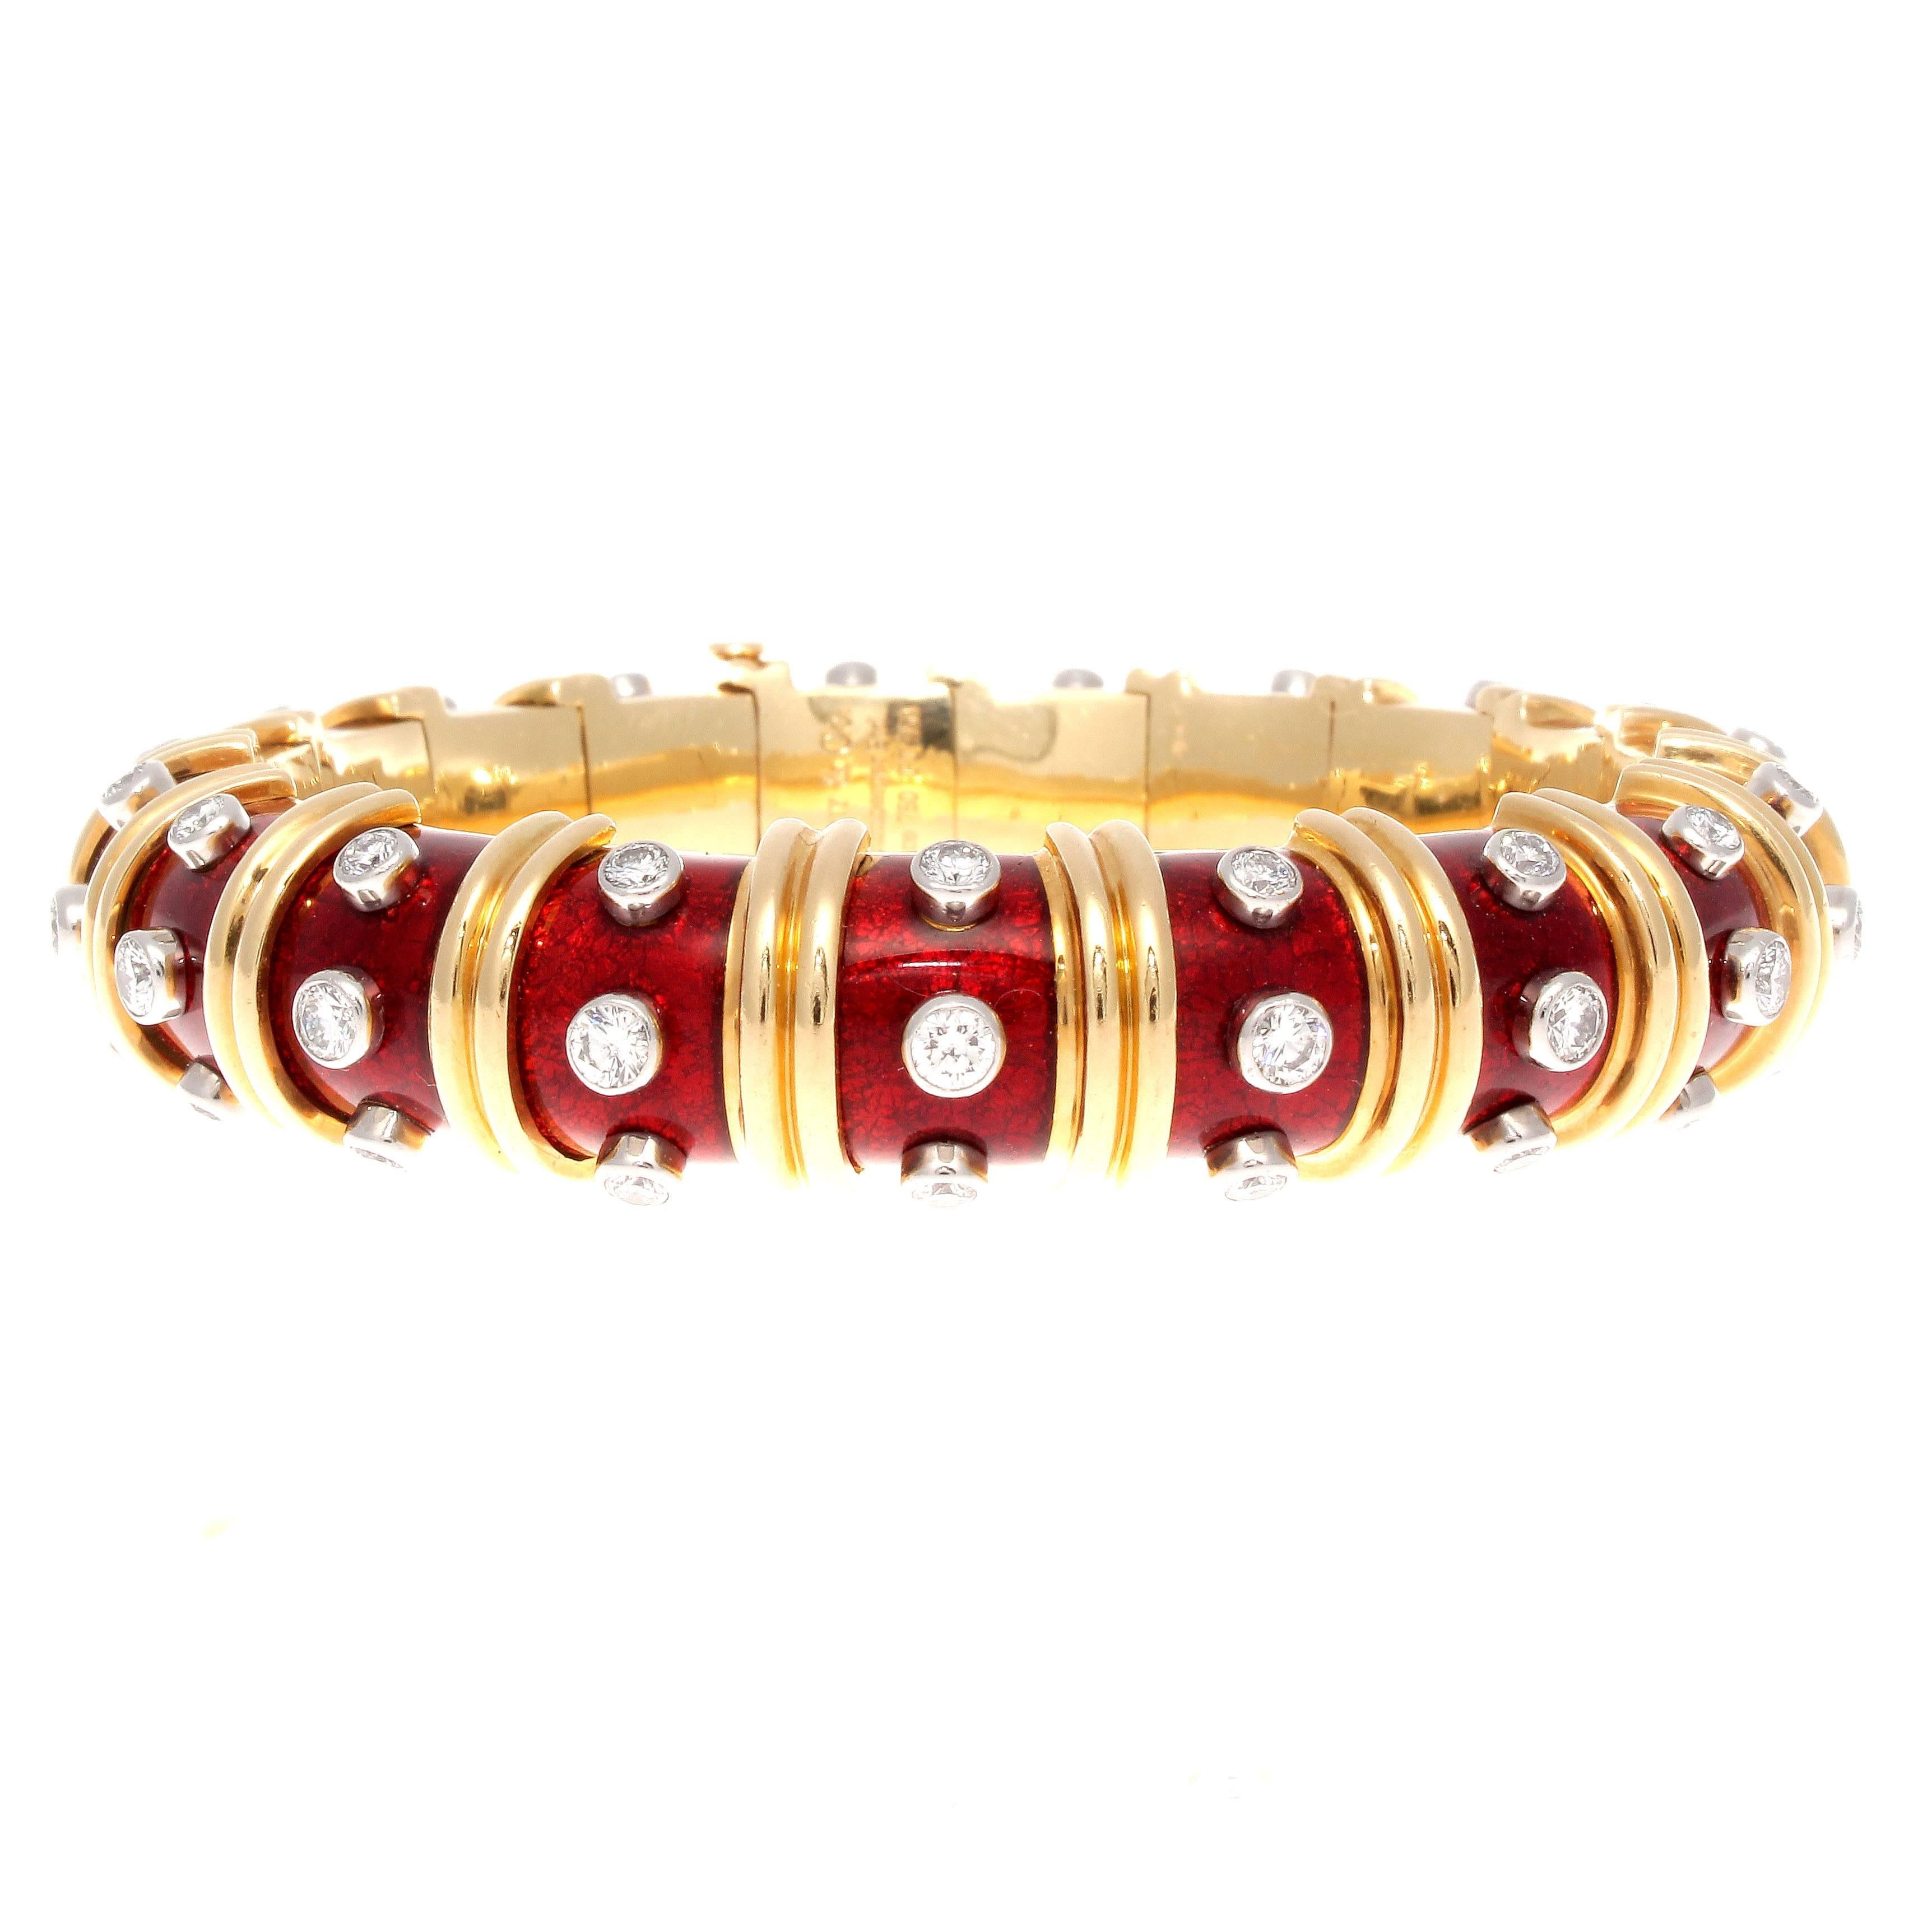 Jean Schlumberger is the top designer from Tiffany and is a master of form. This elegant Paillonne bangle bracelet is created with translucent red enamel, partitioned by ribs of 18k gold perfectly complemented by 57 white, clean diamonds that weigh